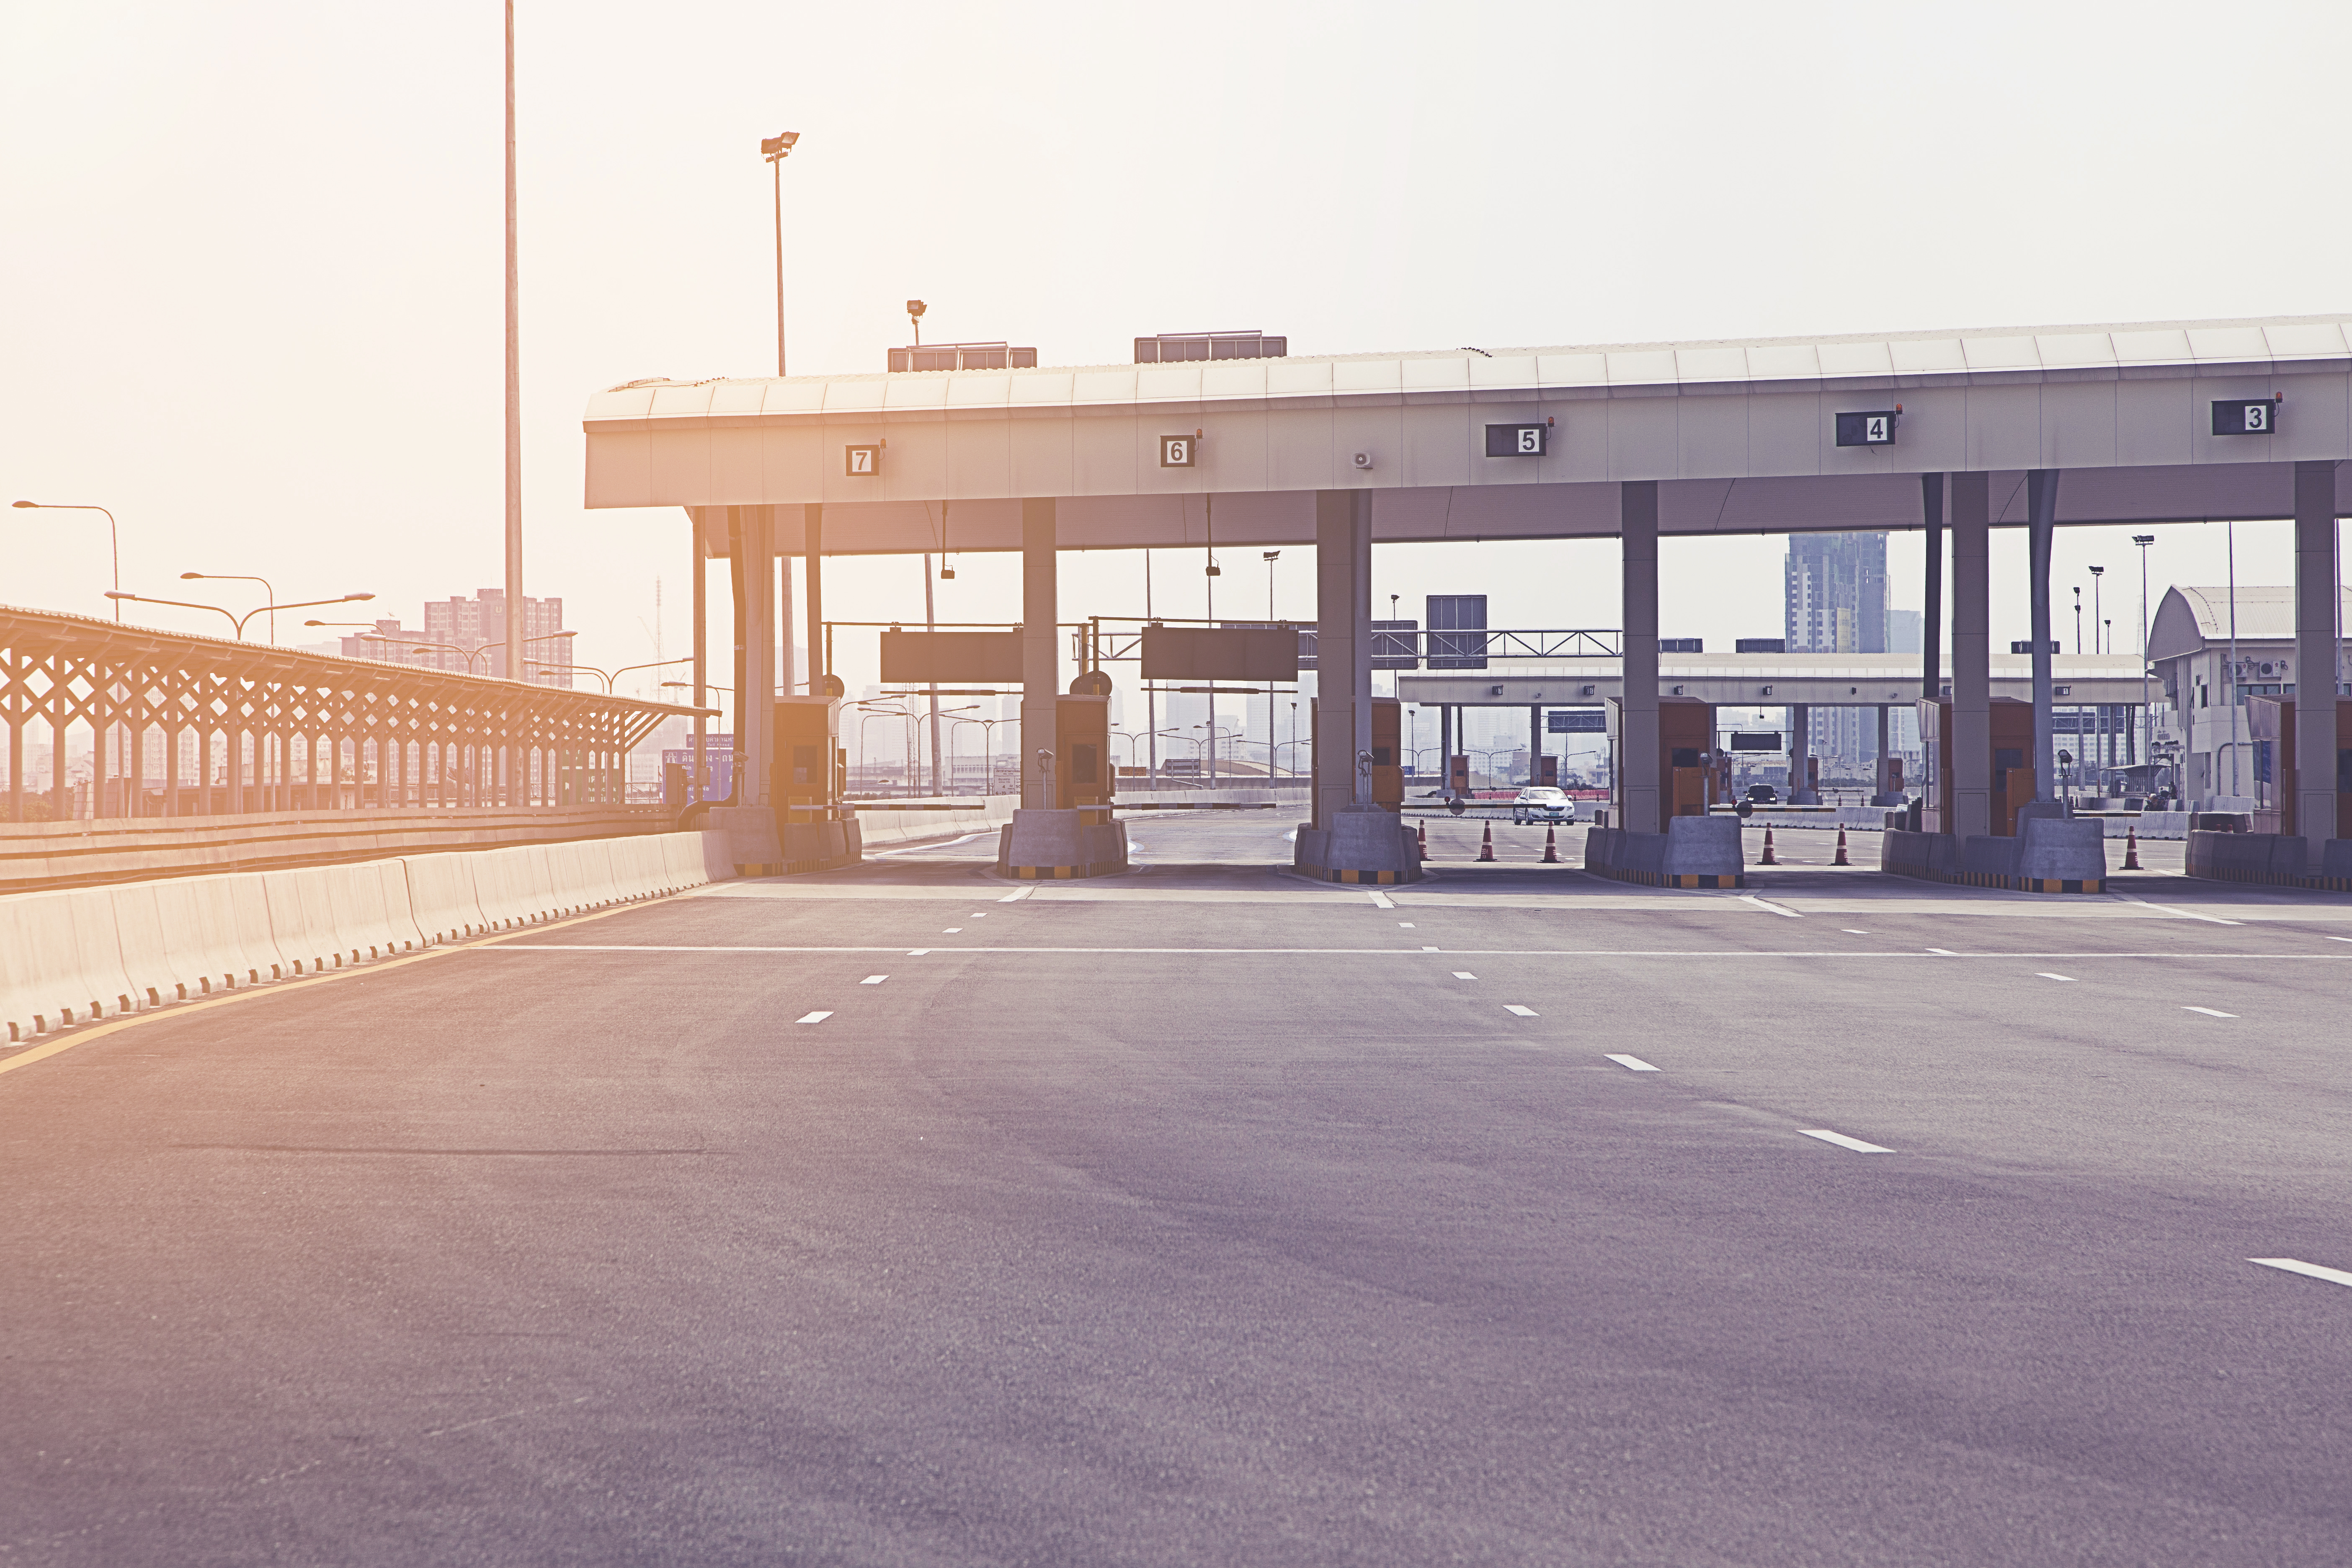 Tollbooths on a wide road | Source: Shutterstock